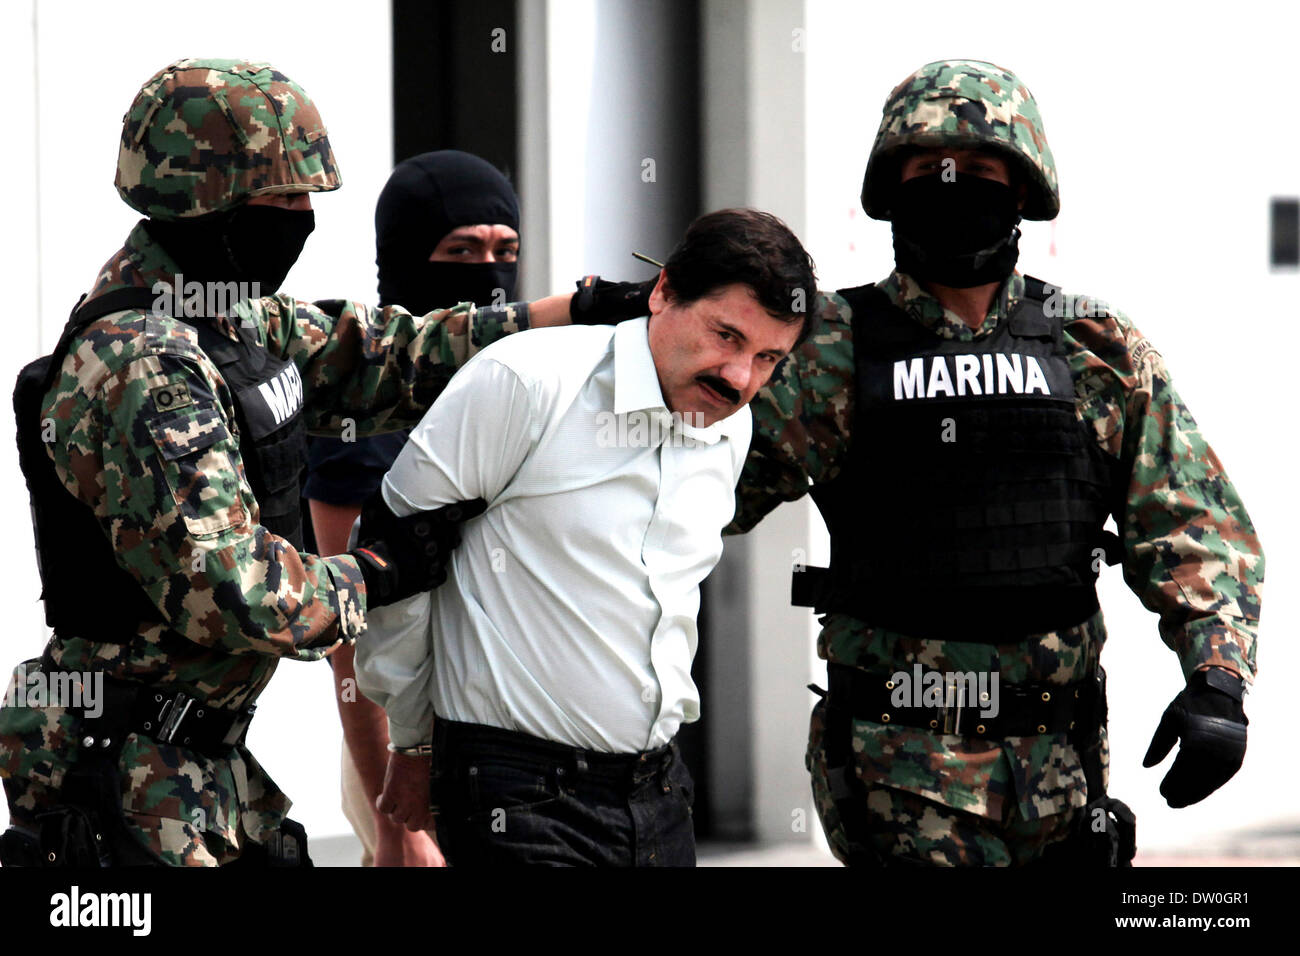 Mexico City, Mexico. 22nd Feb, 2014. Mexican Navy soldiers escort Joaquin Guzman Loera (front), alias ''El Chapo Guzman'', leader of the Sinaloa Cartel, during his show up in front of the press, at the Mexican Navy hangar in Mexico City, capital of Mexico, on Feb. 22, 2014. Mexican President Enrique Pena Nieto on Saturday confirmed the capture of the world's most wanted drug lord, Joaquin Guzman Loera, known as El Chapo, in the Pacific resort of Mazatlan. © Jair Cabrera Torres/NurPhoto/ZUMAPRESS.com/Alamy Live News Stock Photo